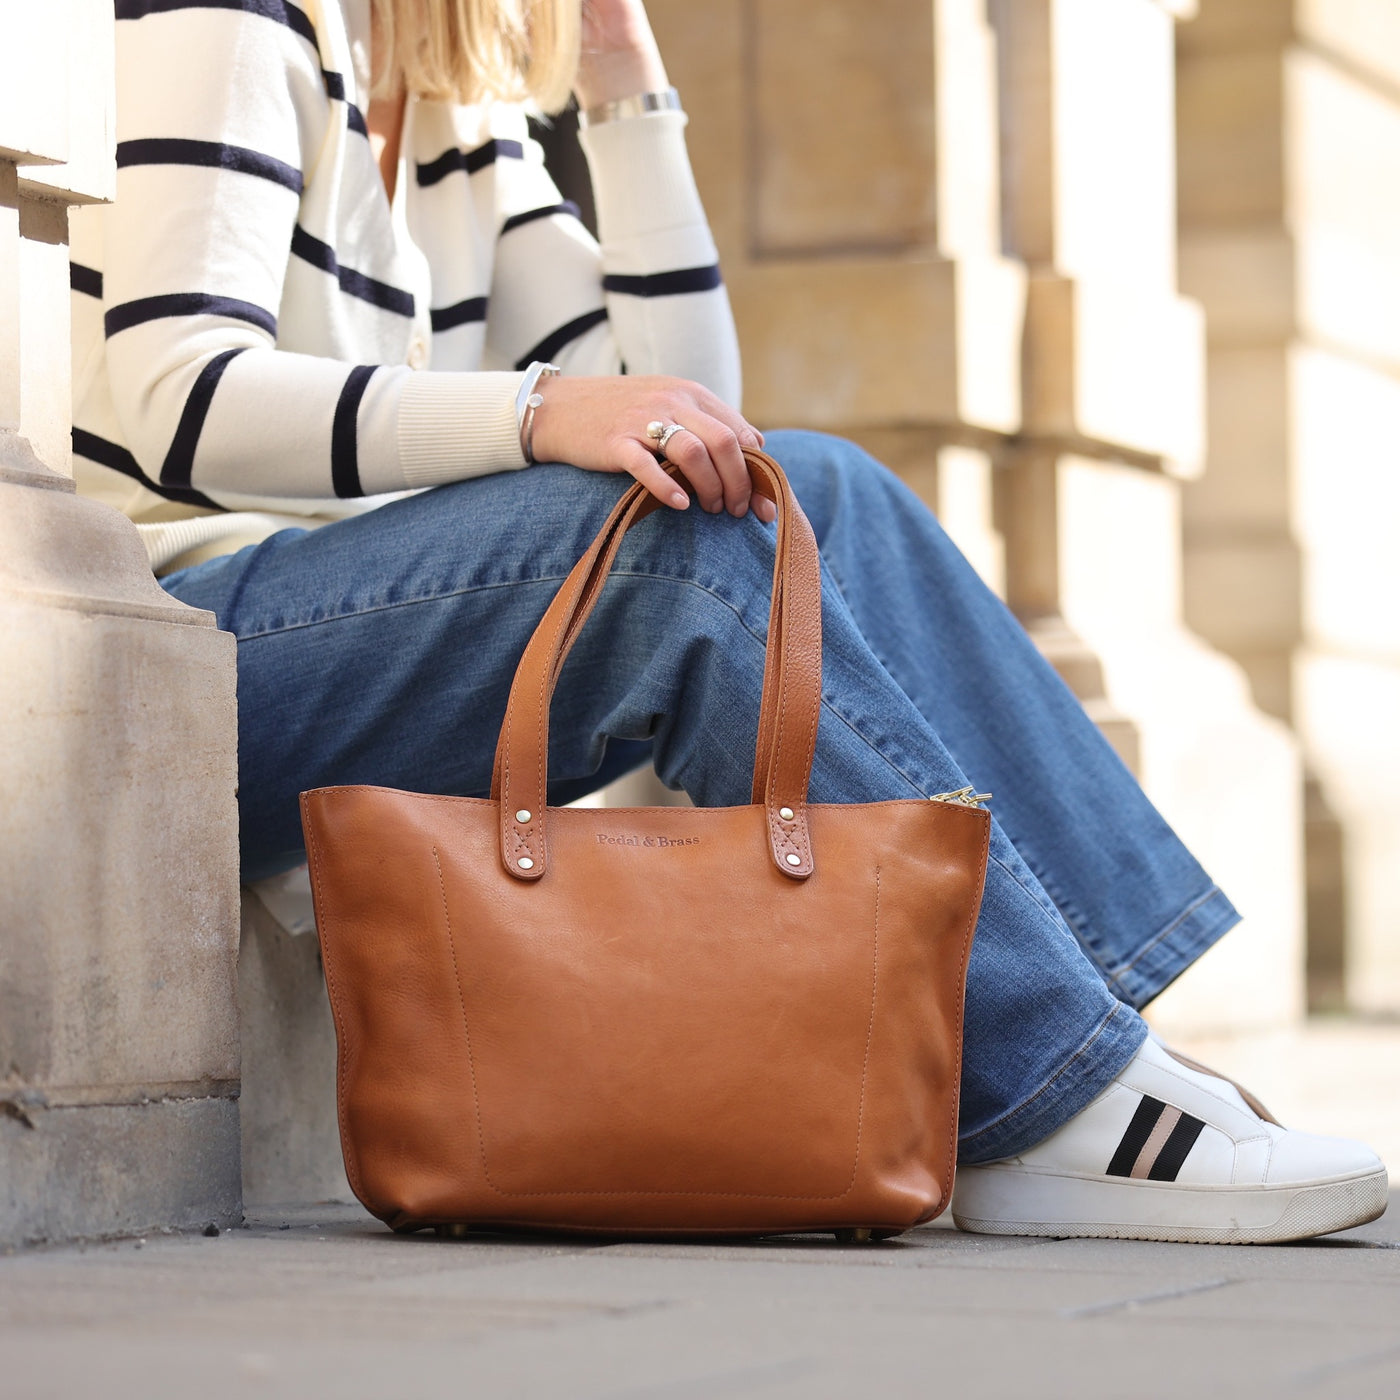 Picture of women's stylish bike bags in the style of a tan Cavendish bike pannier tote bag